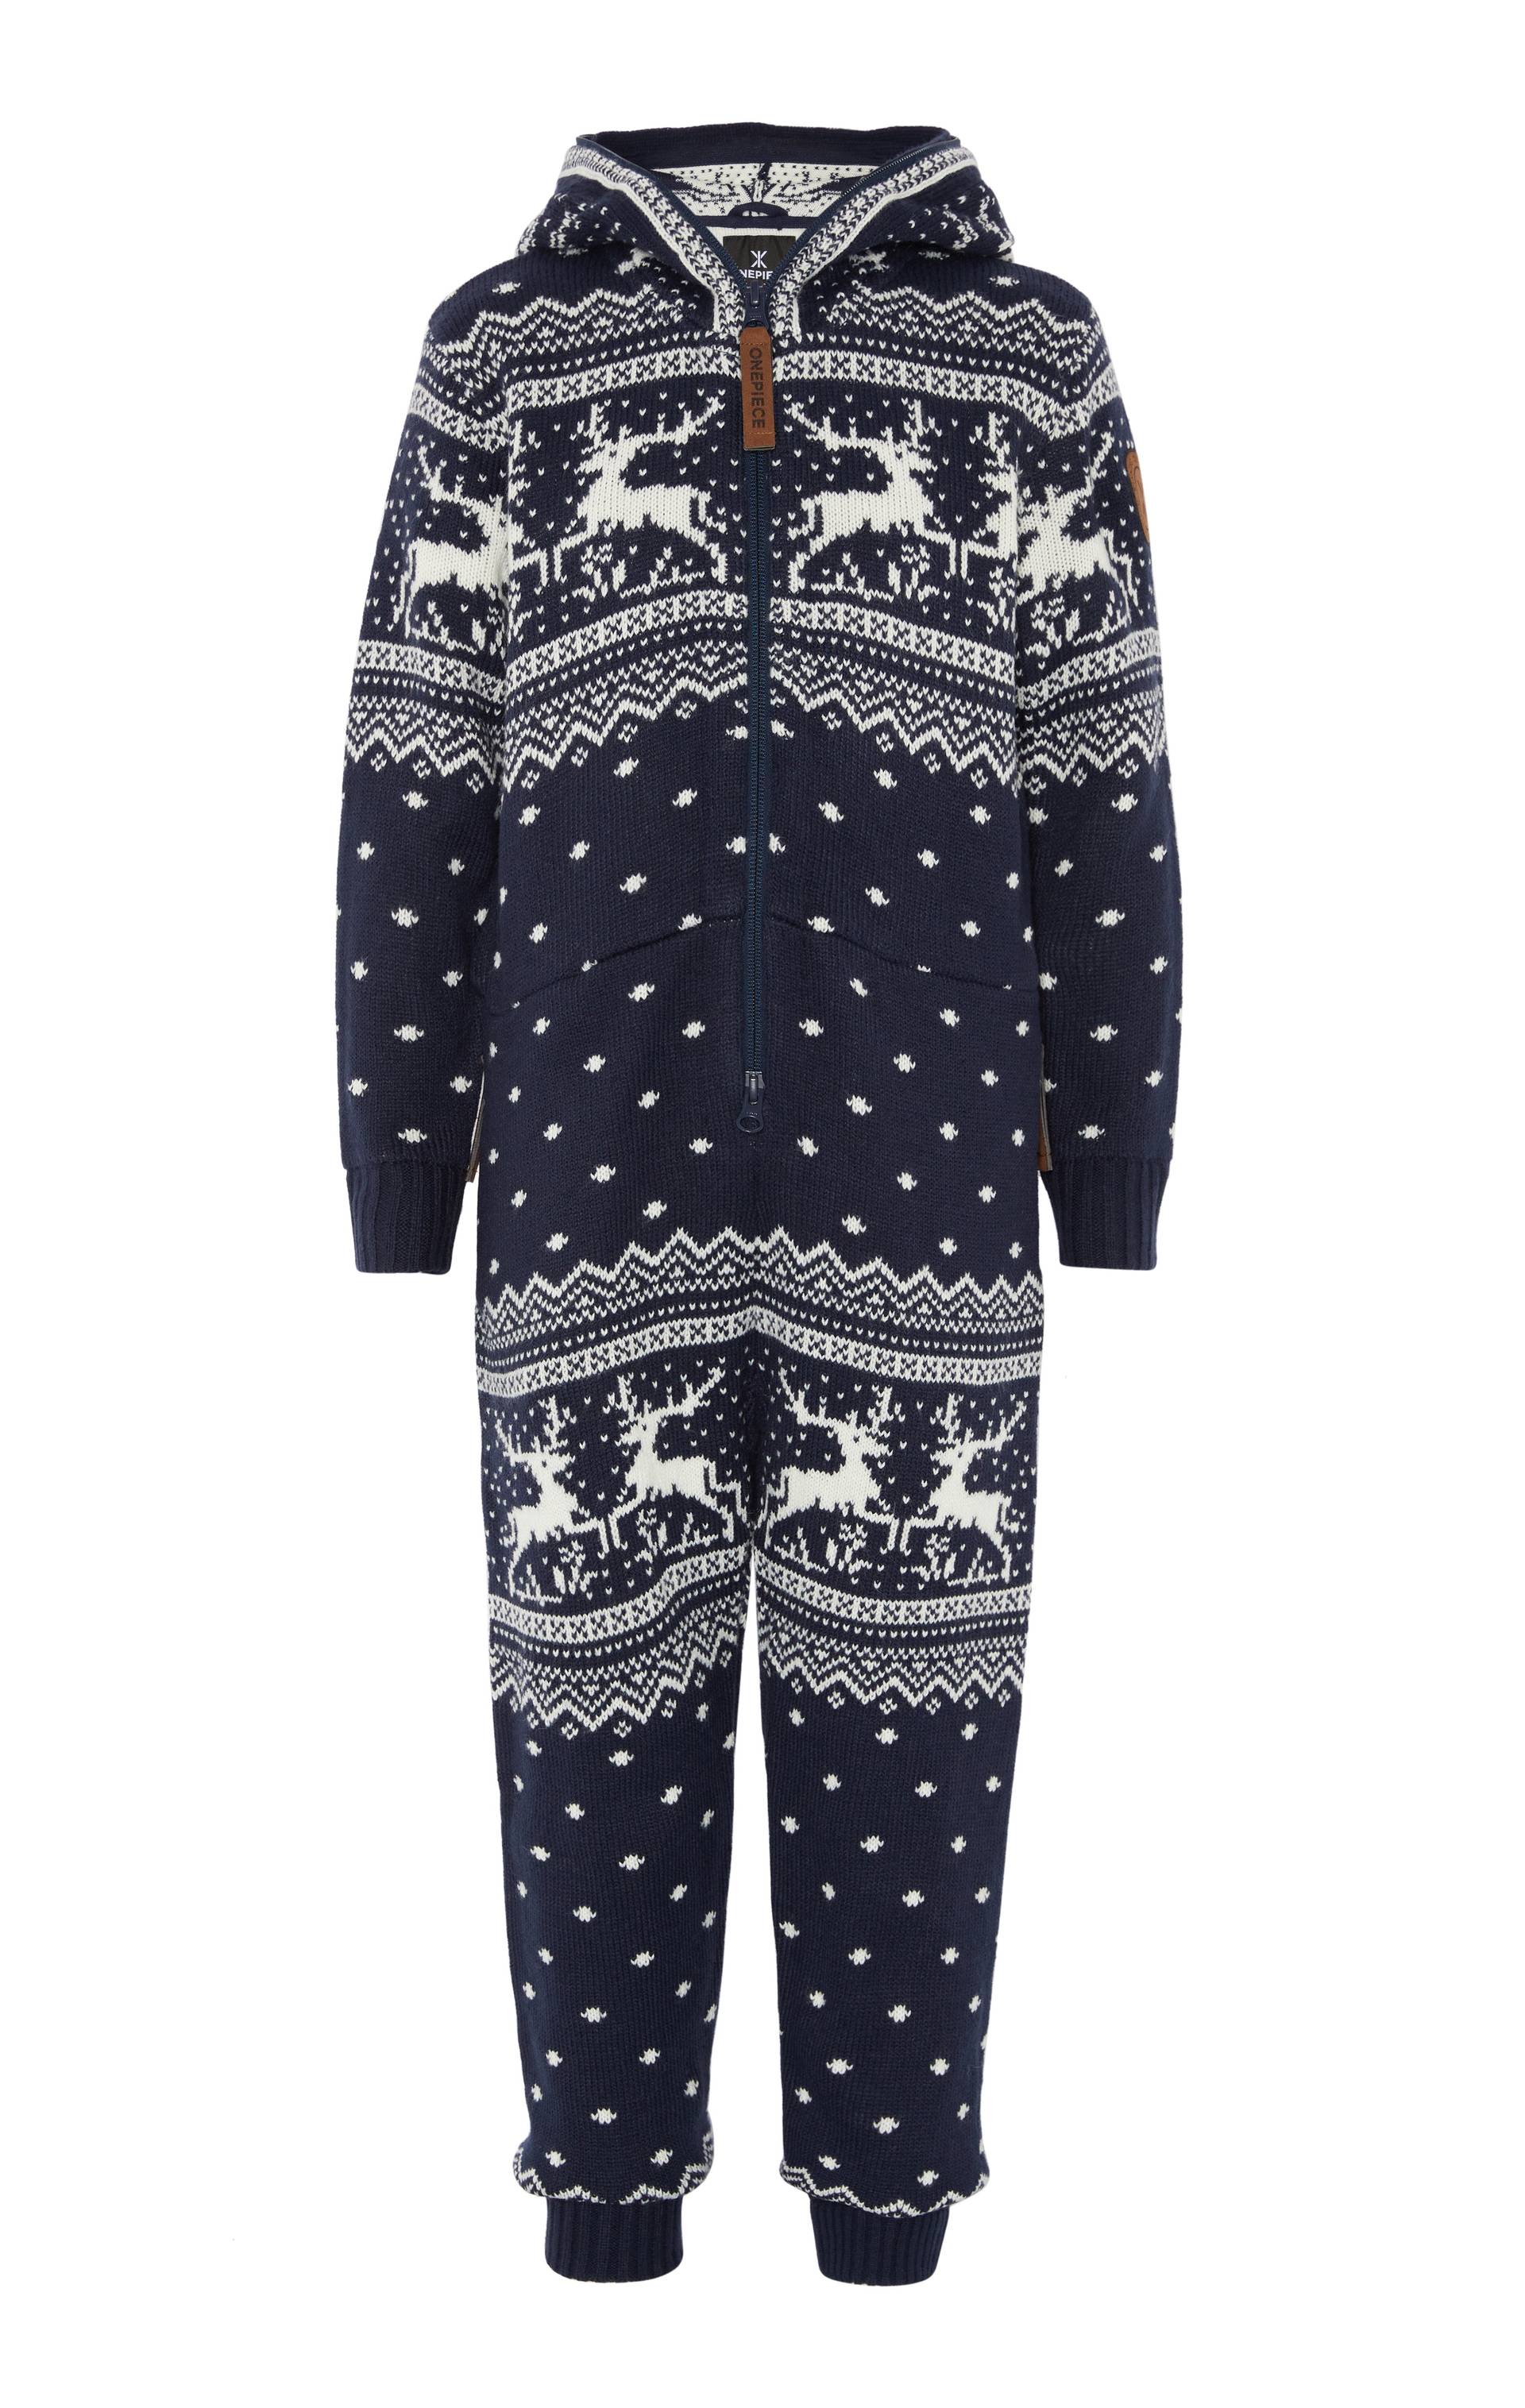 Onepiece Holidays Are Coming KIDS Onesie Jumpsuit Navy - 5